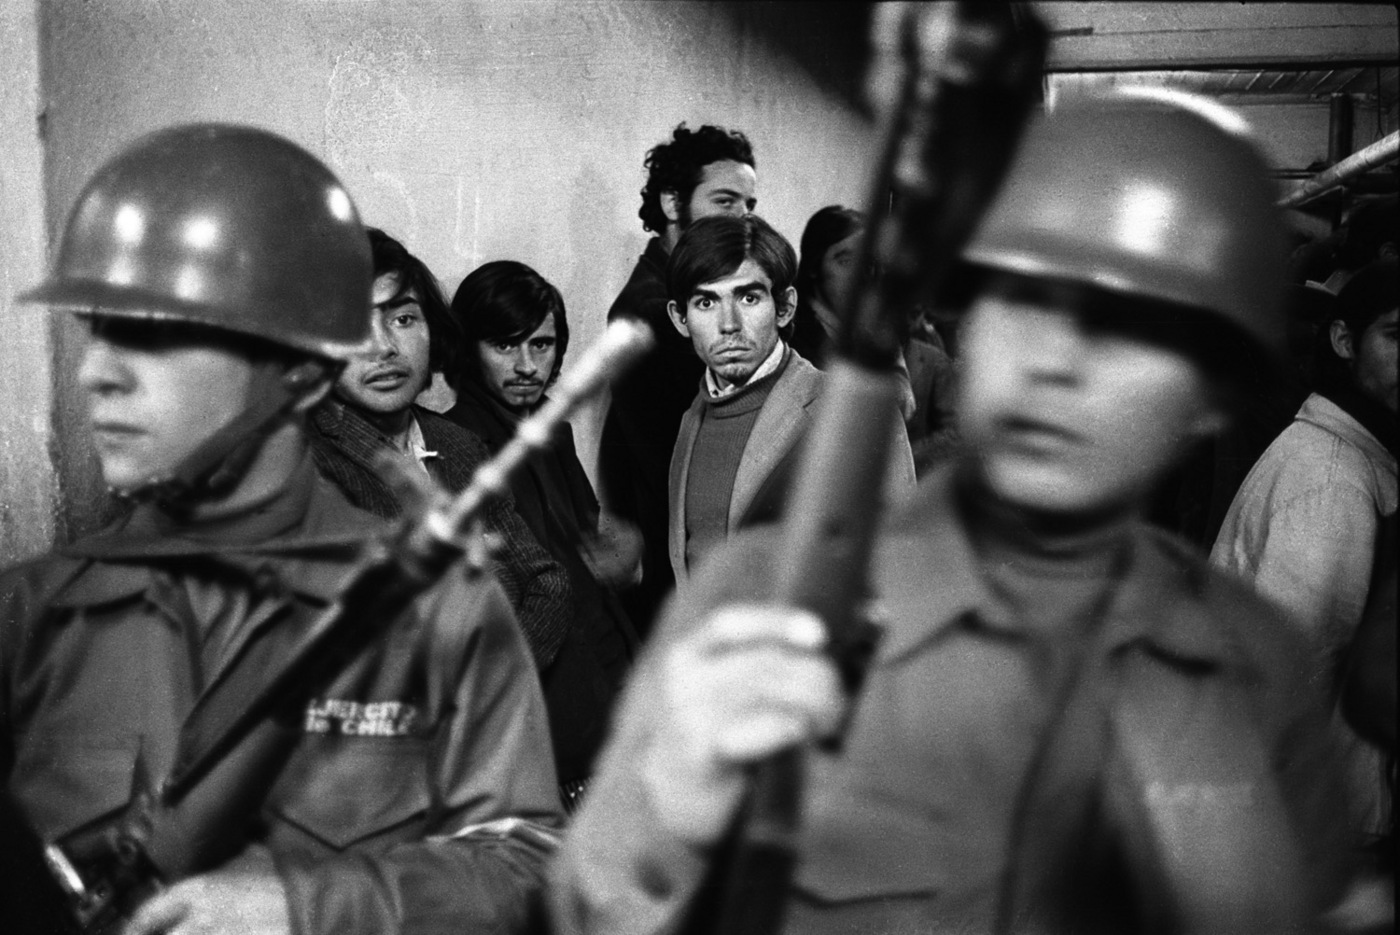 Young lab workers, arrested as potential "extremists" are brought into the National Stadium. : Chile: 40 Years After the Coup d'Etat : David Burnett | Photographer